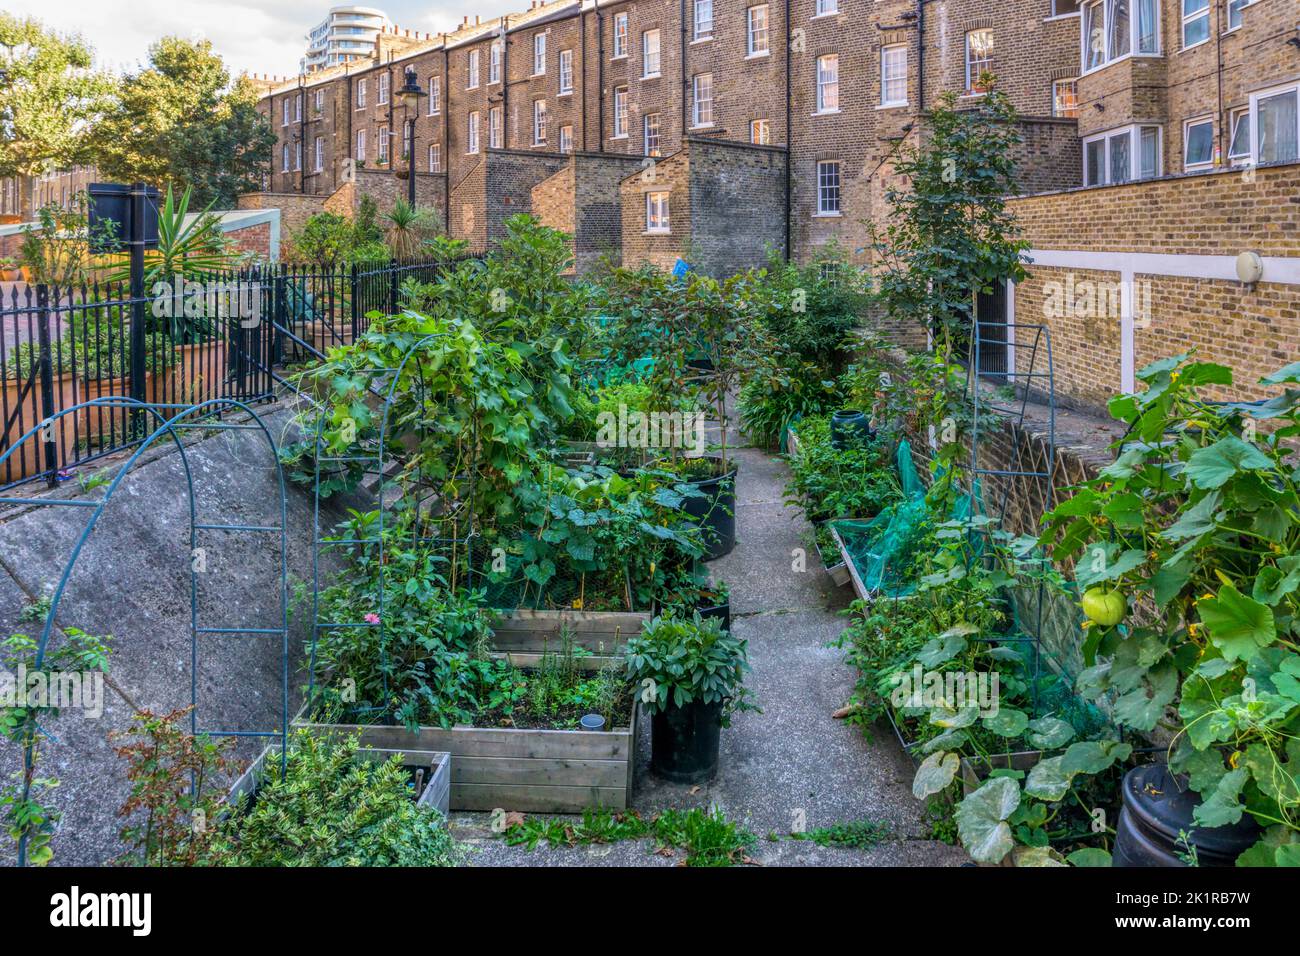 Originally part of the perimeter ditch of Millbank Prison, this area now serves as a garden for nearby flats. One of the few remains of the prison. Stock Photo